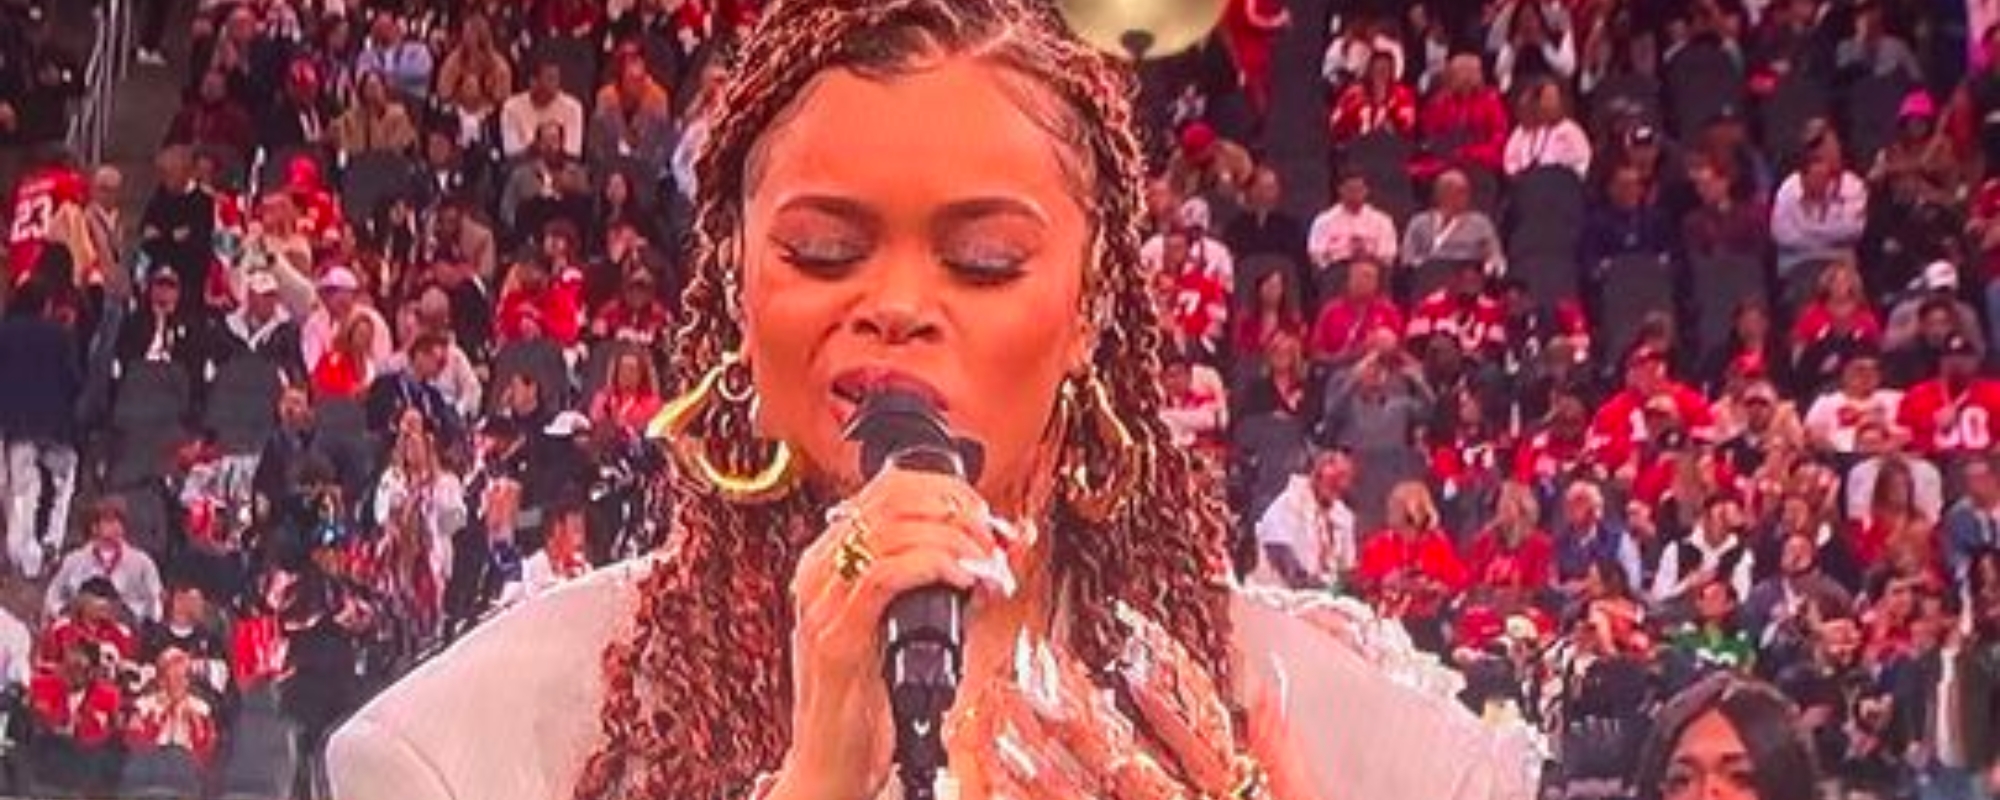 Andra Day's Super Bowl performance takes the internet by storm.